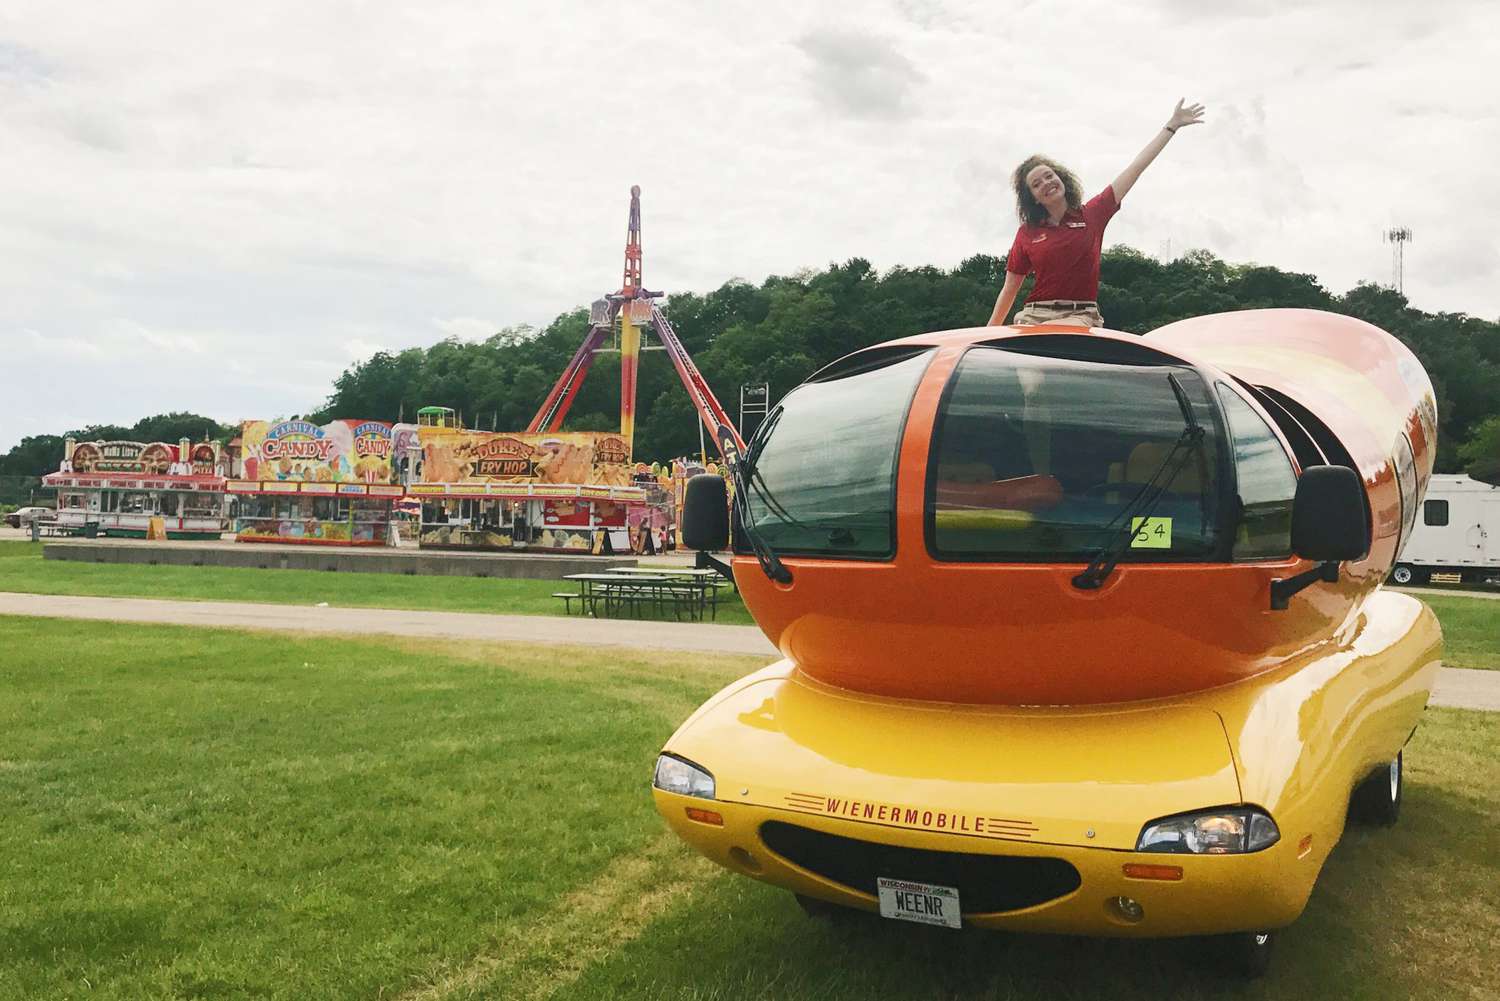 Here's What It's Like to Drive a Giant Hot Dog for a Living